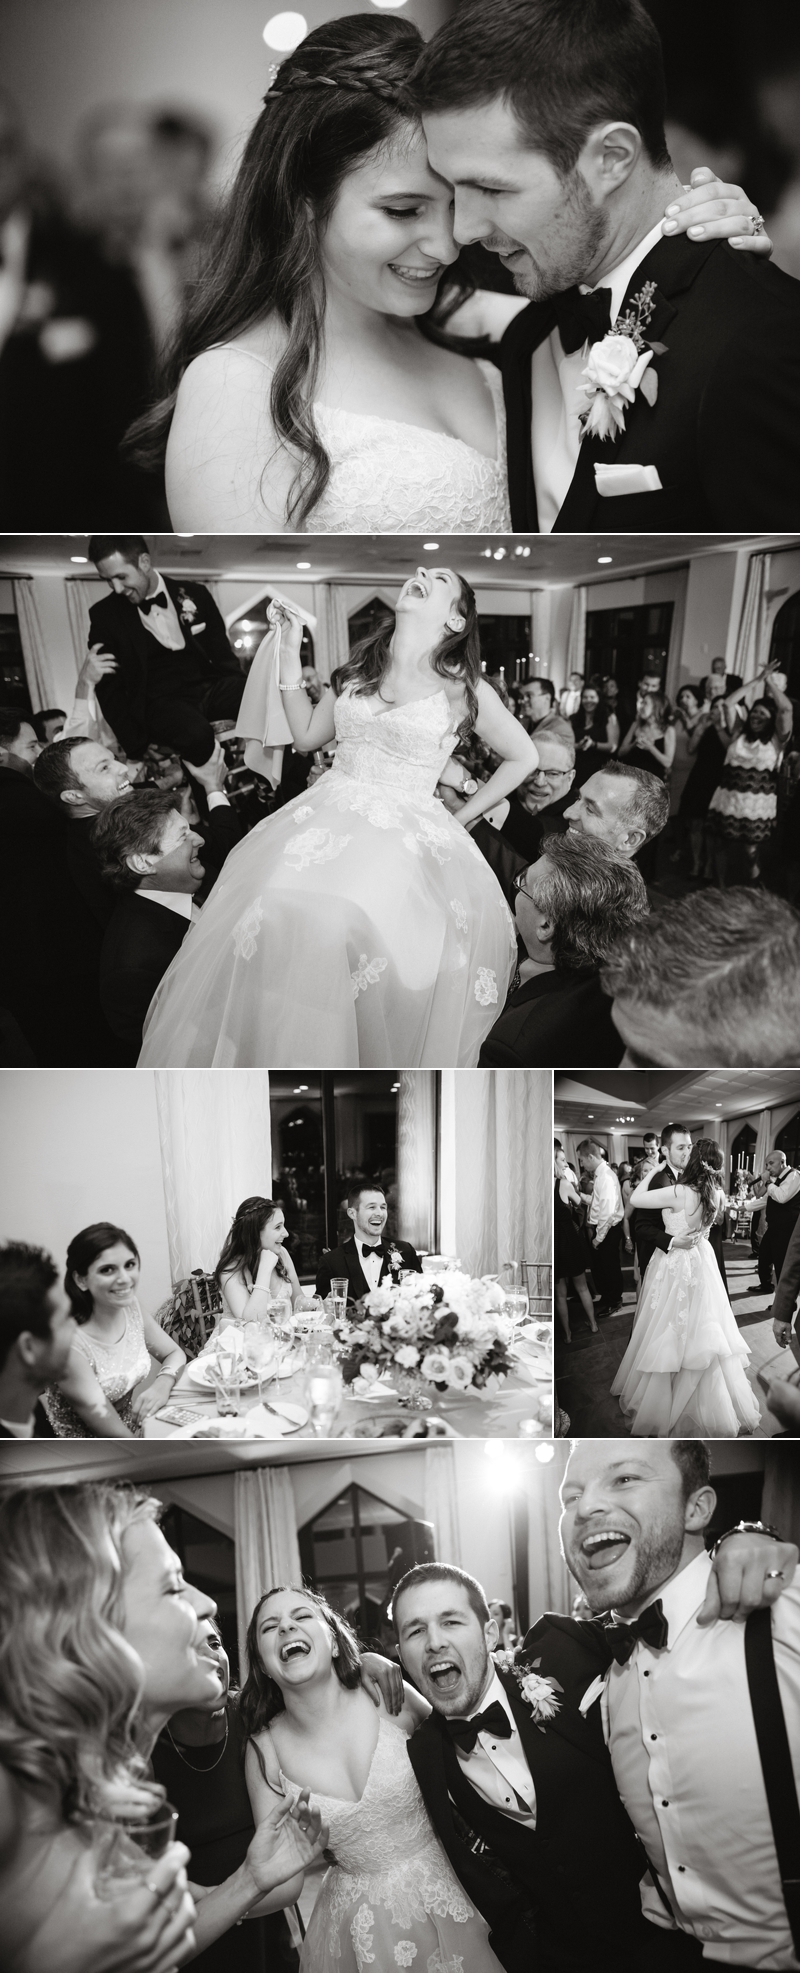 A fun and off-beat wedding reception was held inside of the classic Aldie Mansion.